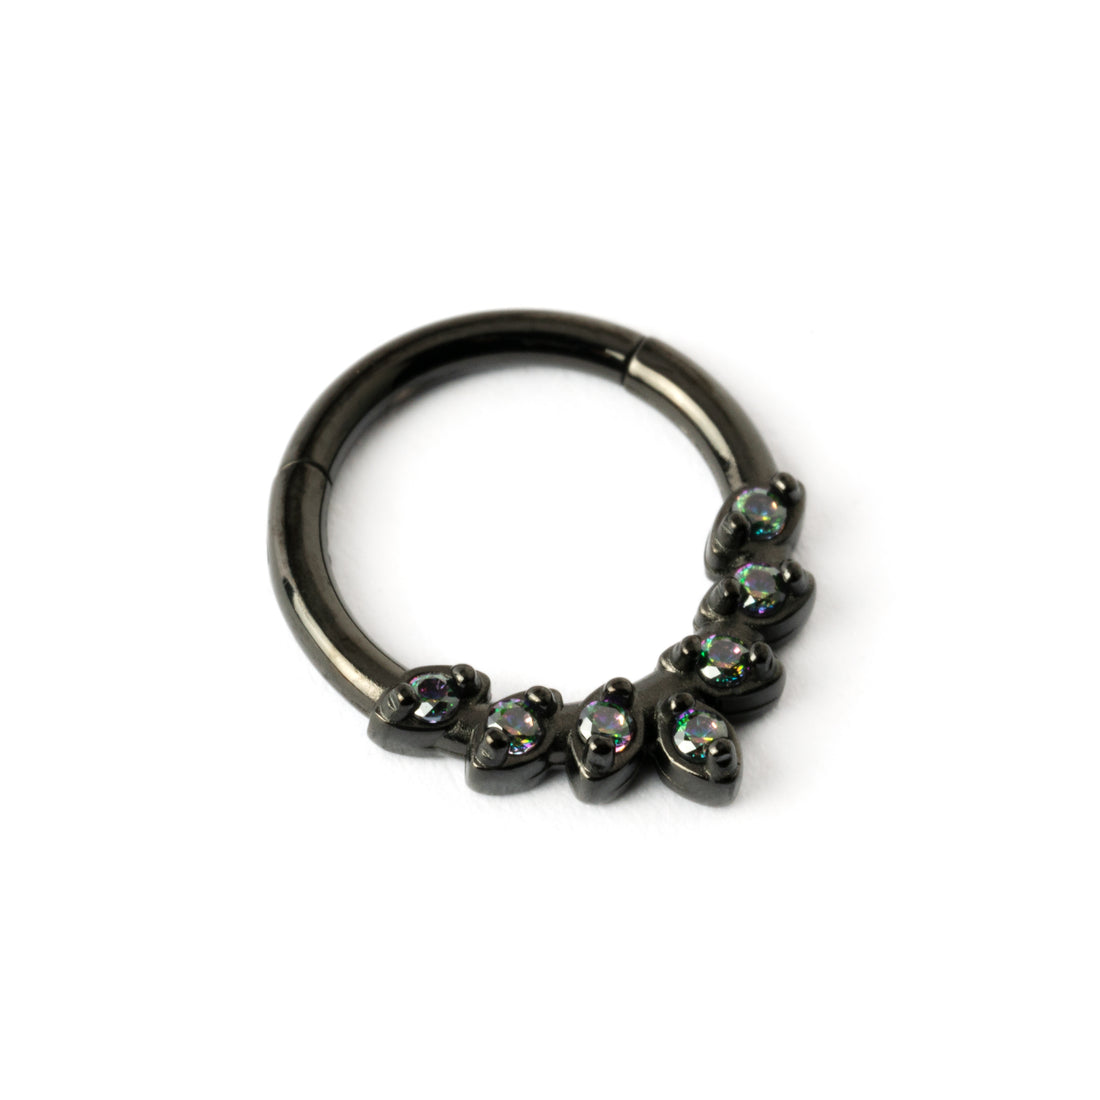 Black surgical steel teardrop petals septum clicker with crystals right side view